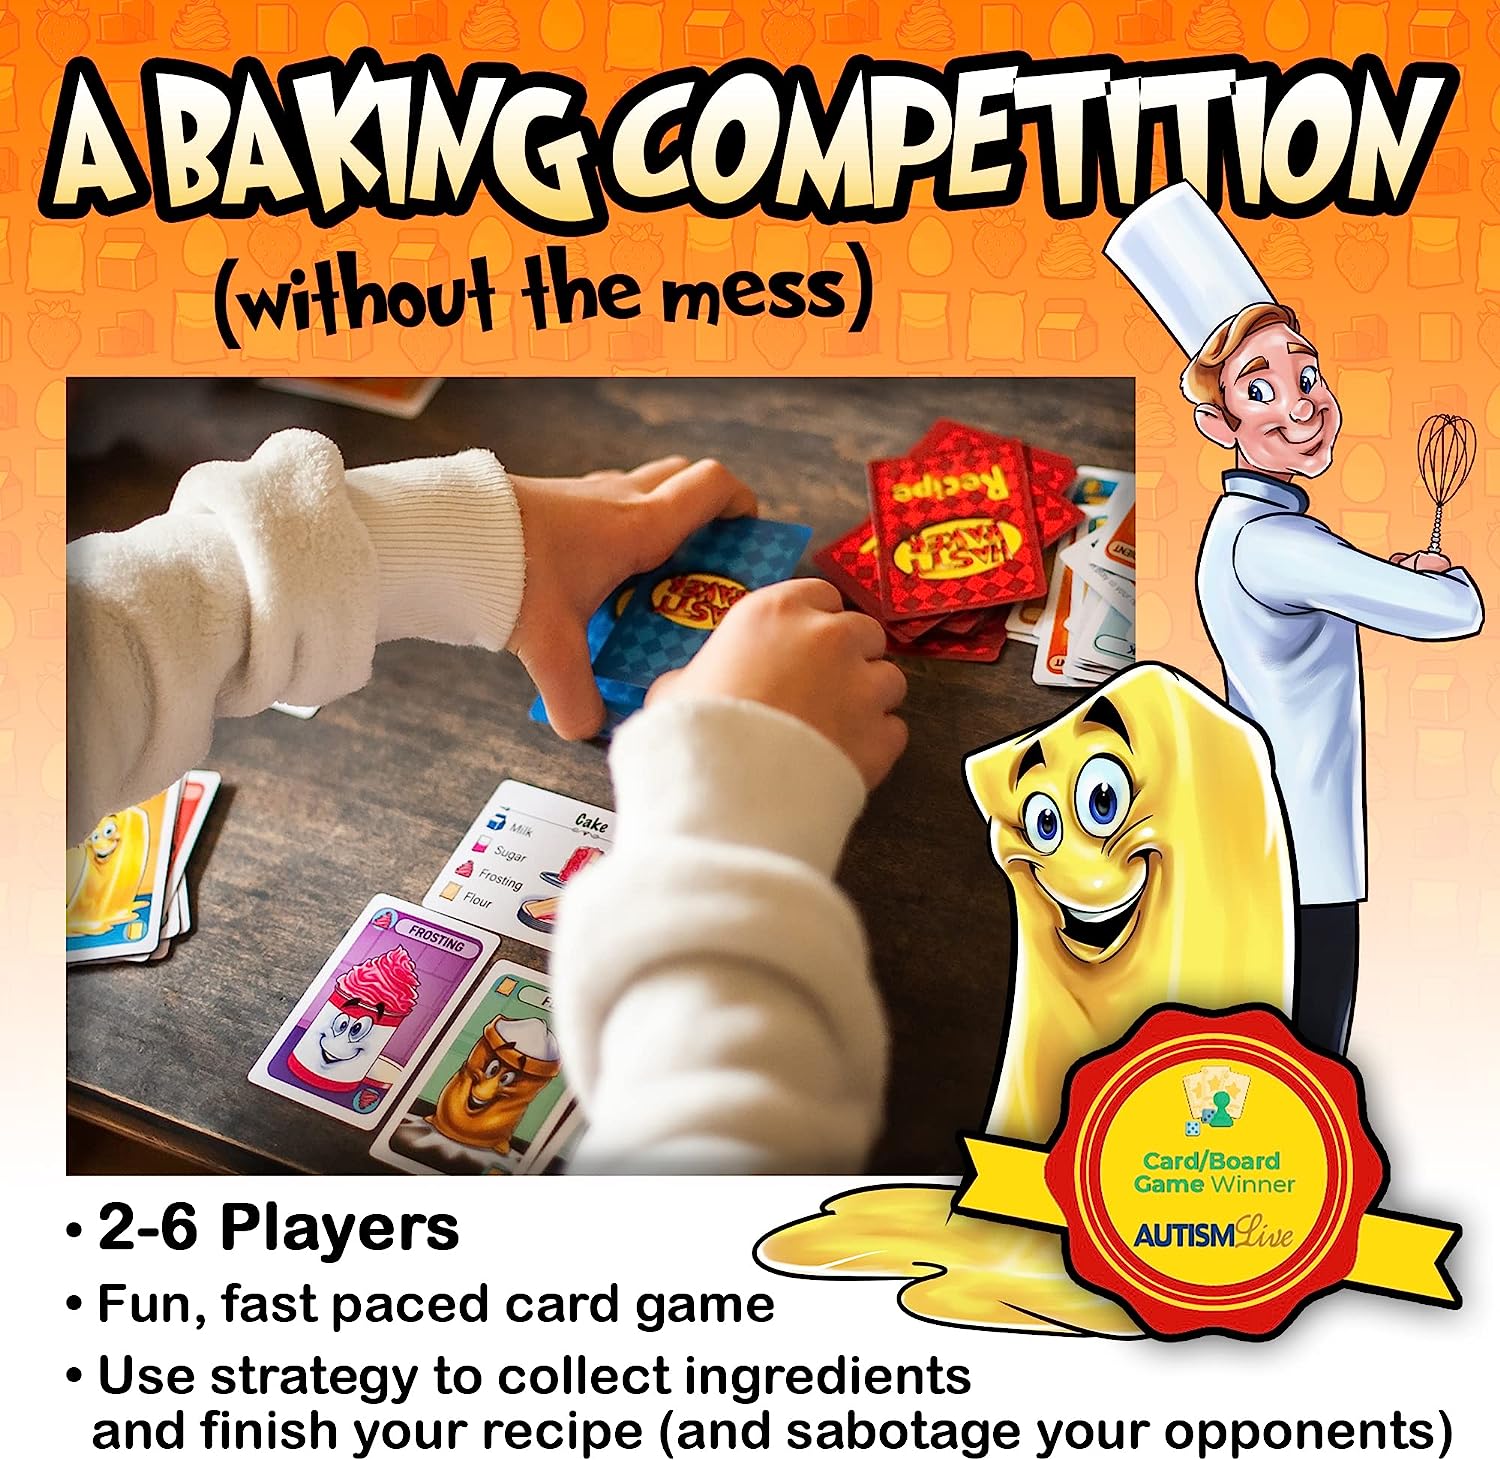 Family Card Game - 2022 Game of The Year Winner - Autism Live Award Winner - A Deliciously Fun Card Game for Family Game Night - 2-6 Players, Ages 7+ Fun Family Games for Kids and Adults